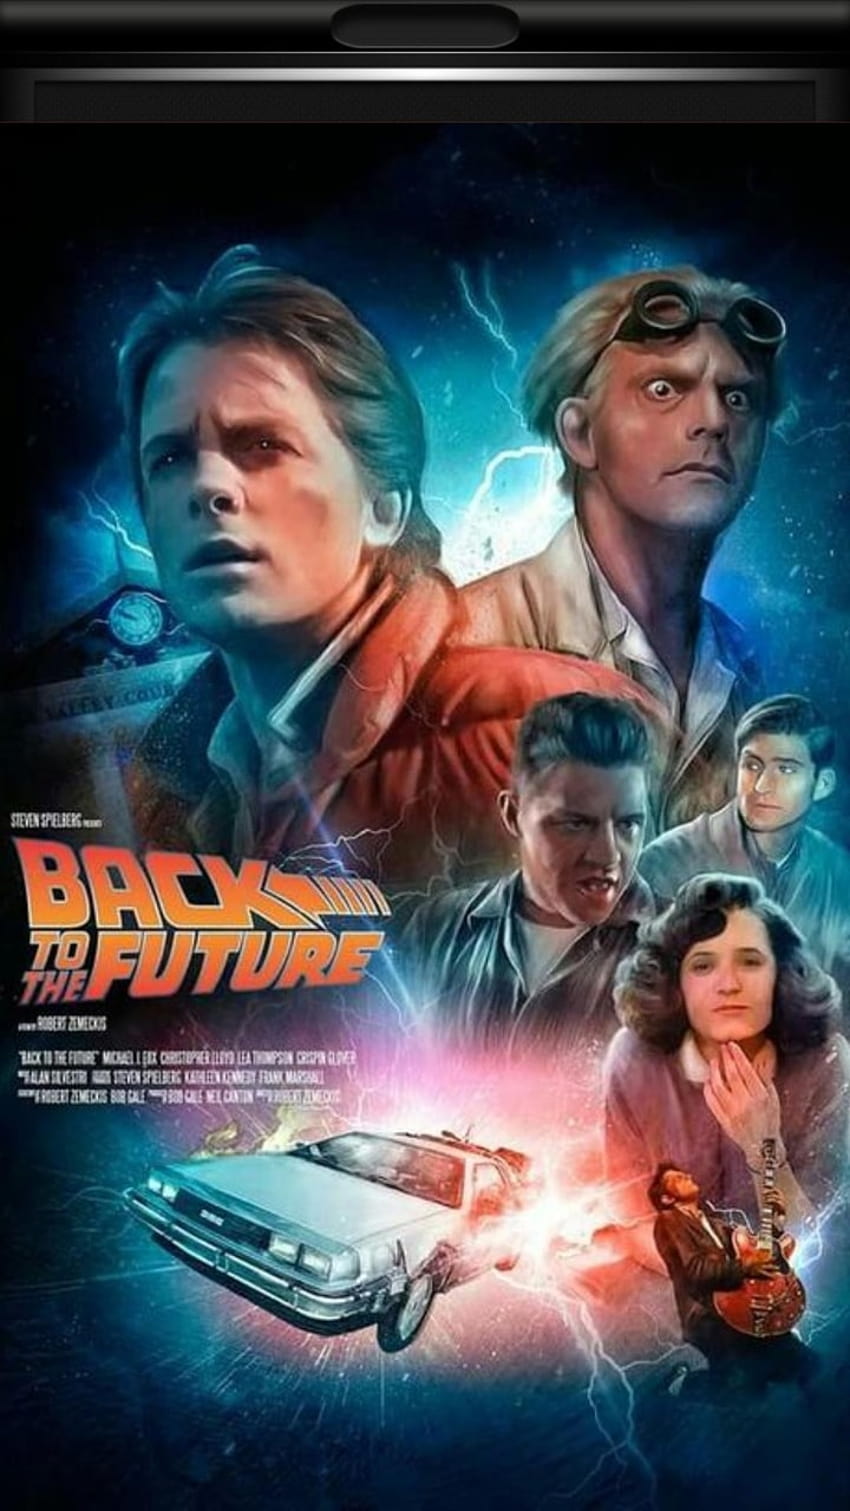 Back to the future ♡, back to the future marty mcfly HD phone wallpaper